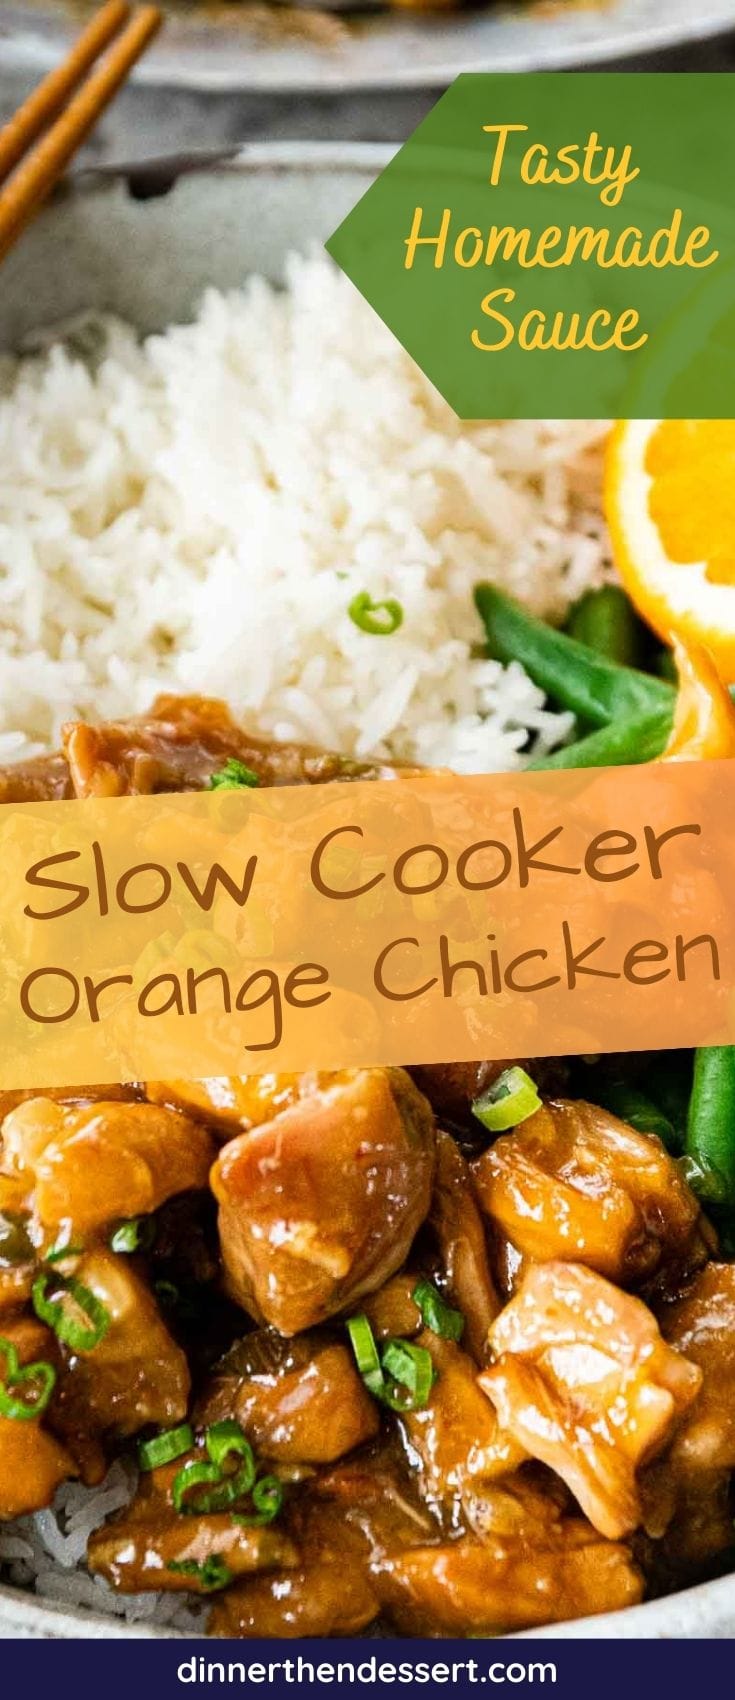 Slow Cooker Orange Chicken plated with rice, recipe name across middle